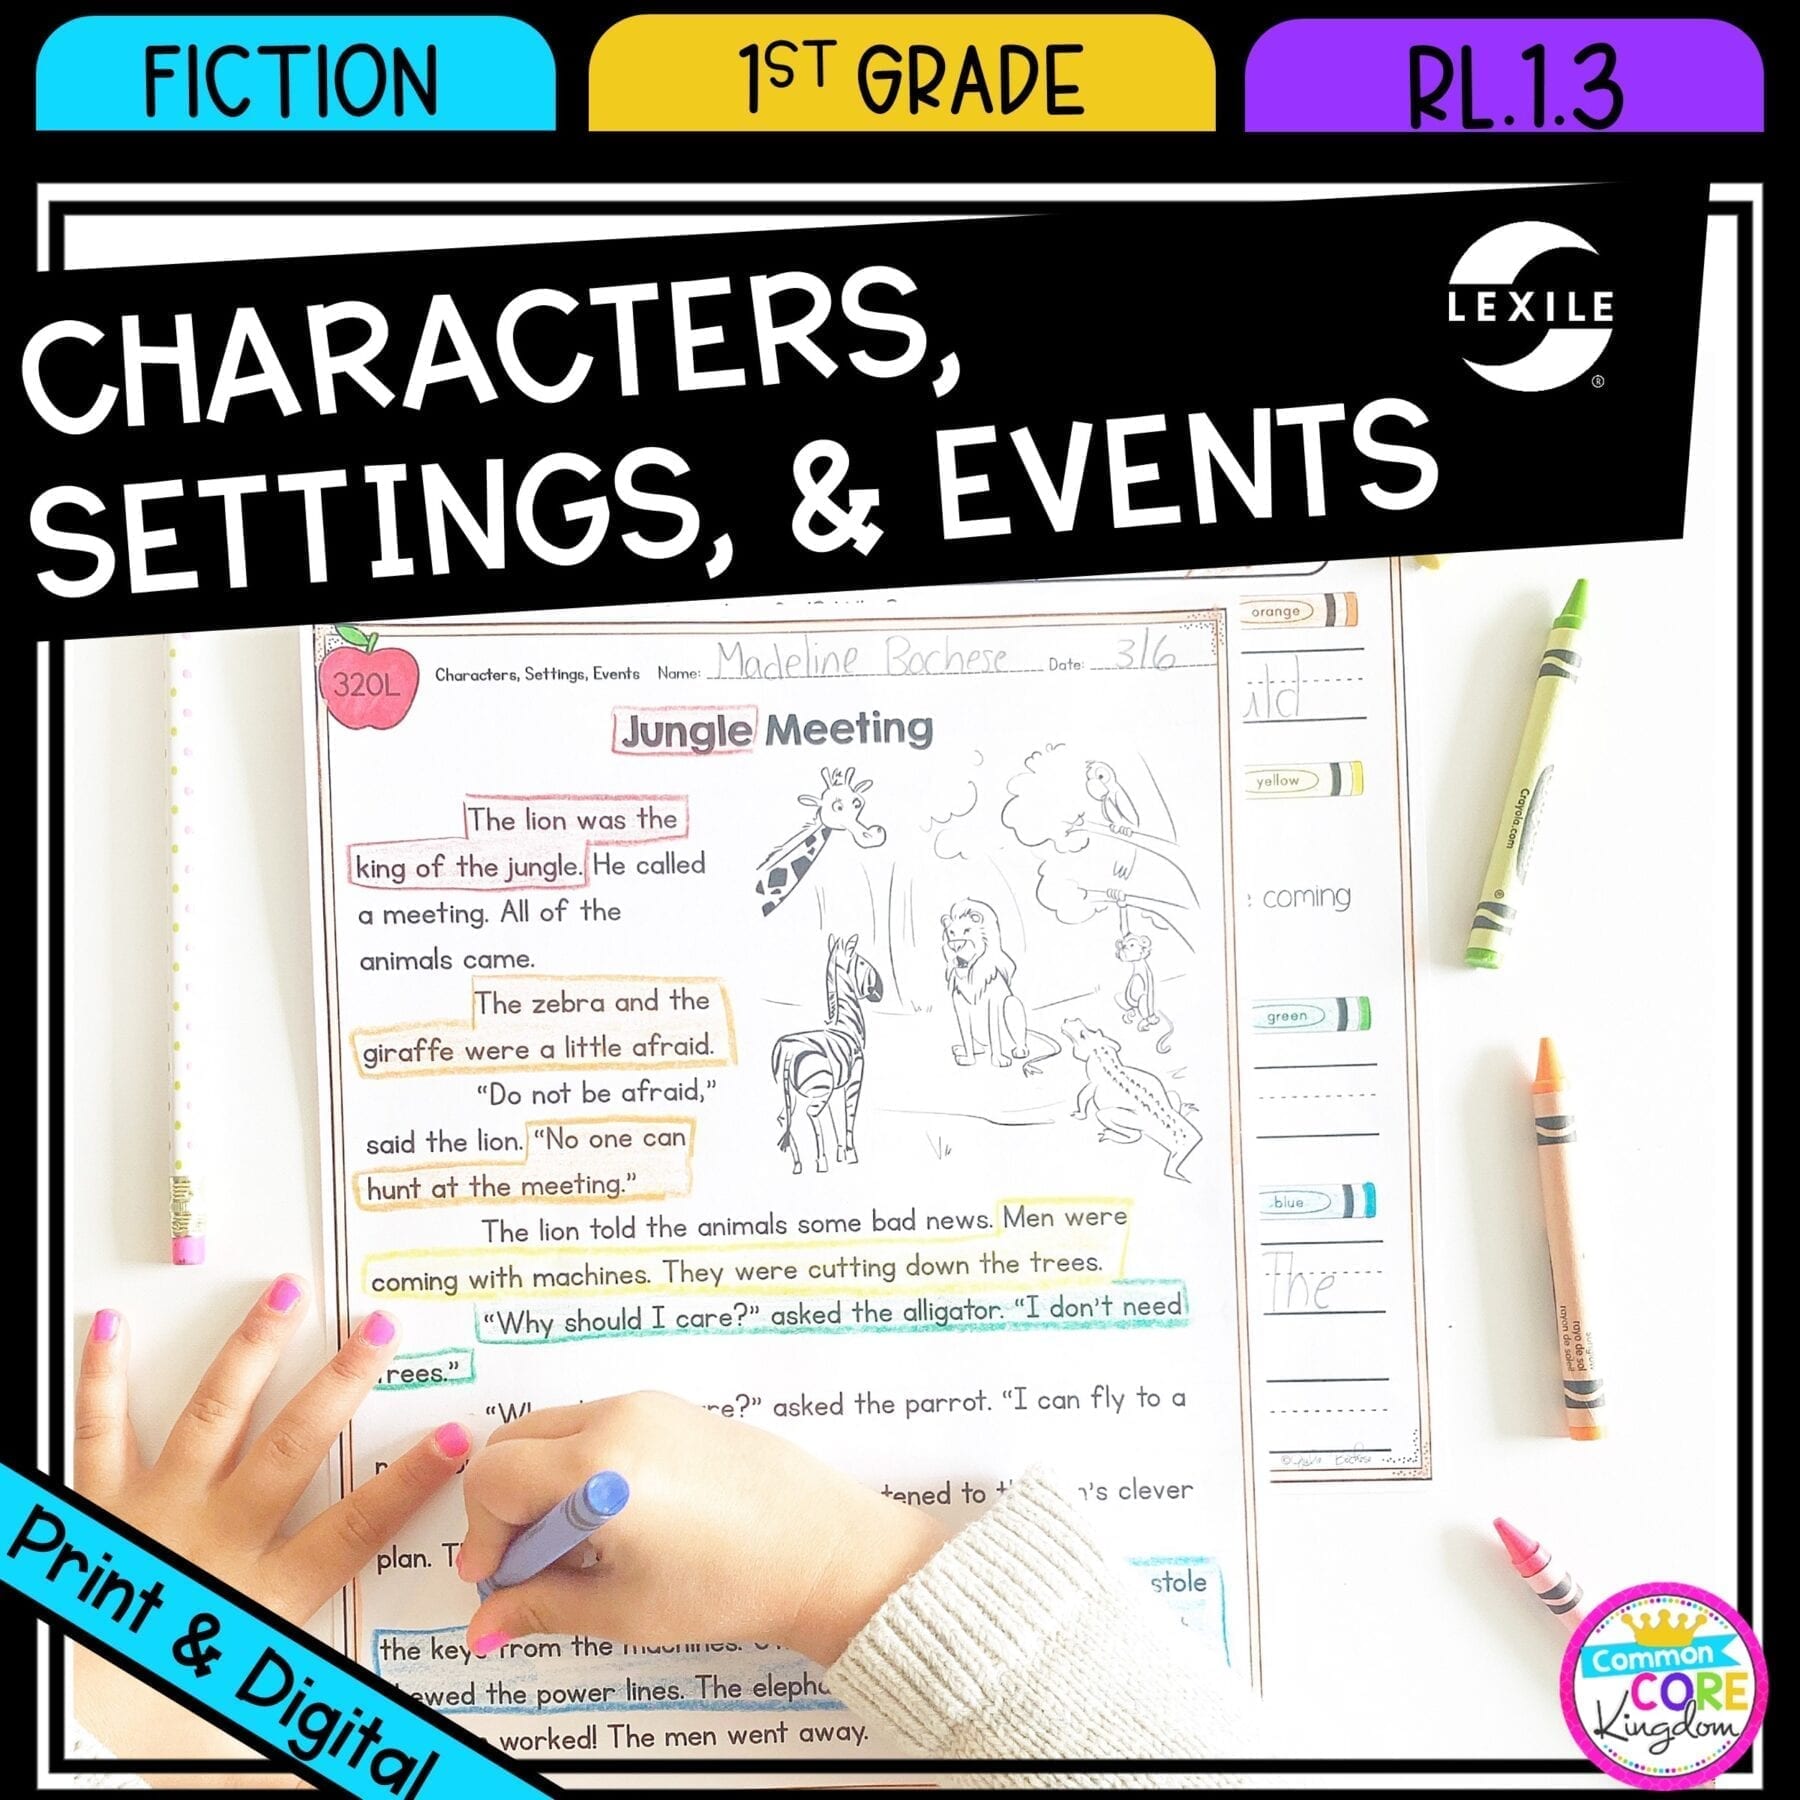 Characters, Settings, and Events for 1st grade cover showing printable and digital worksheets